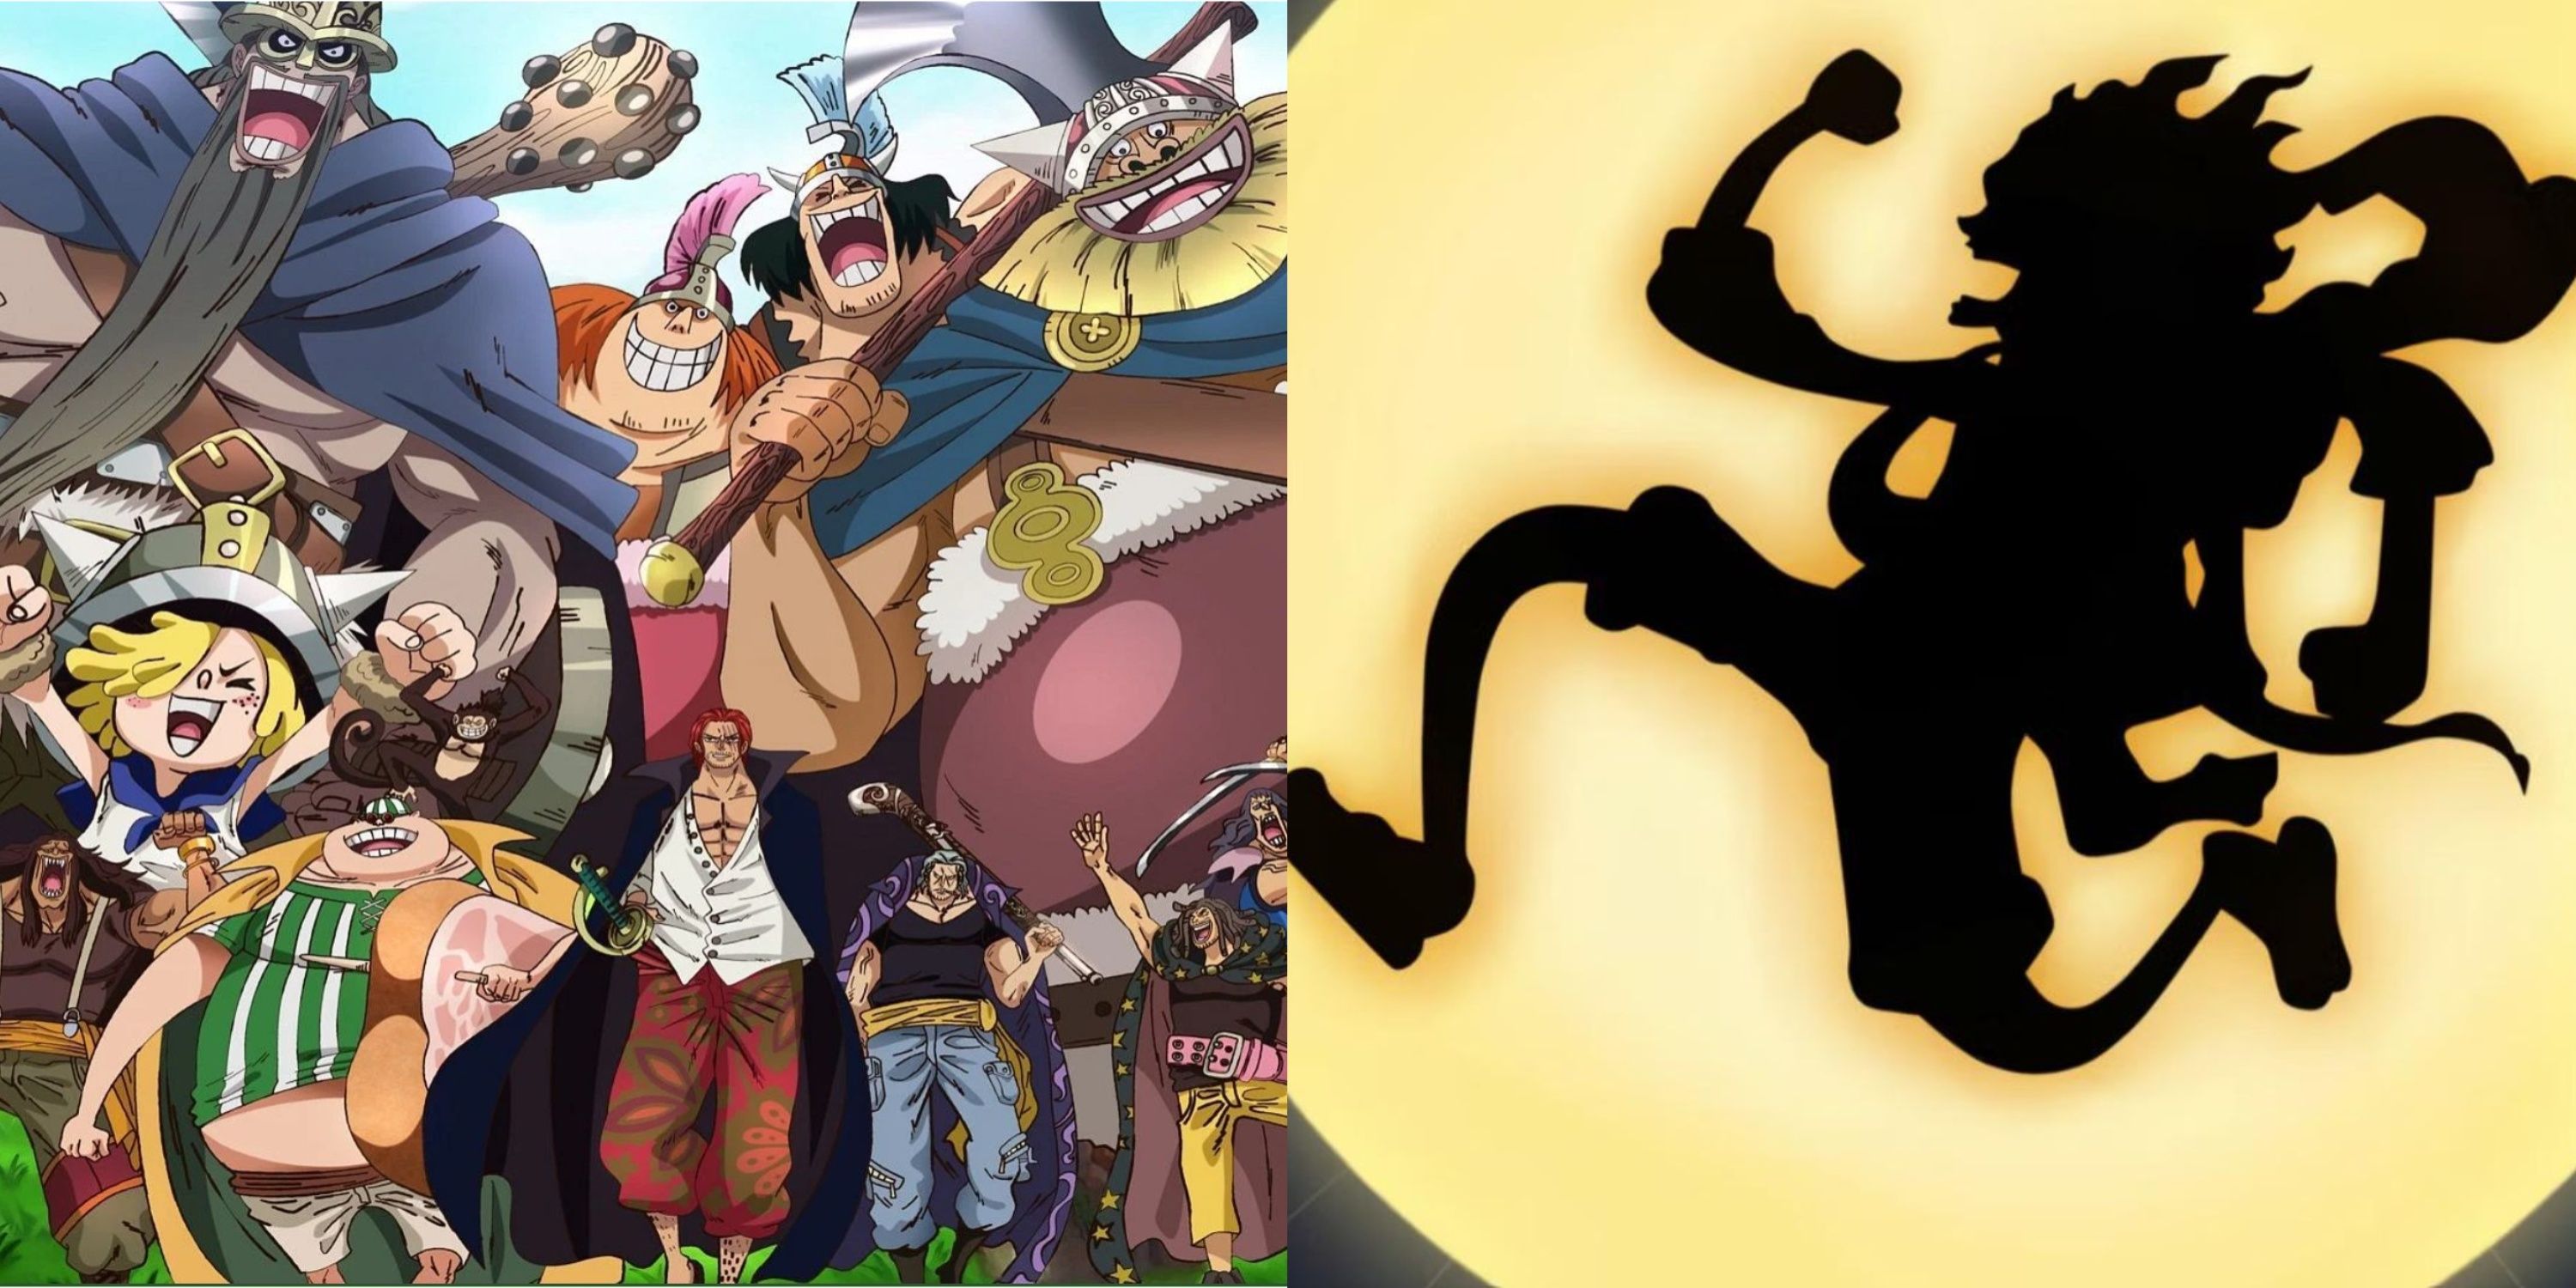 Will The Giants Of Elbaf Reveal Joy Boy's Past One Piece - Featured